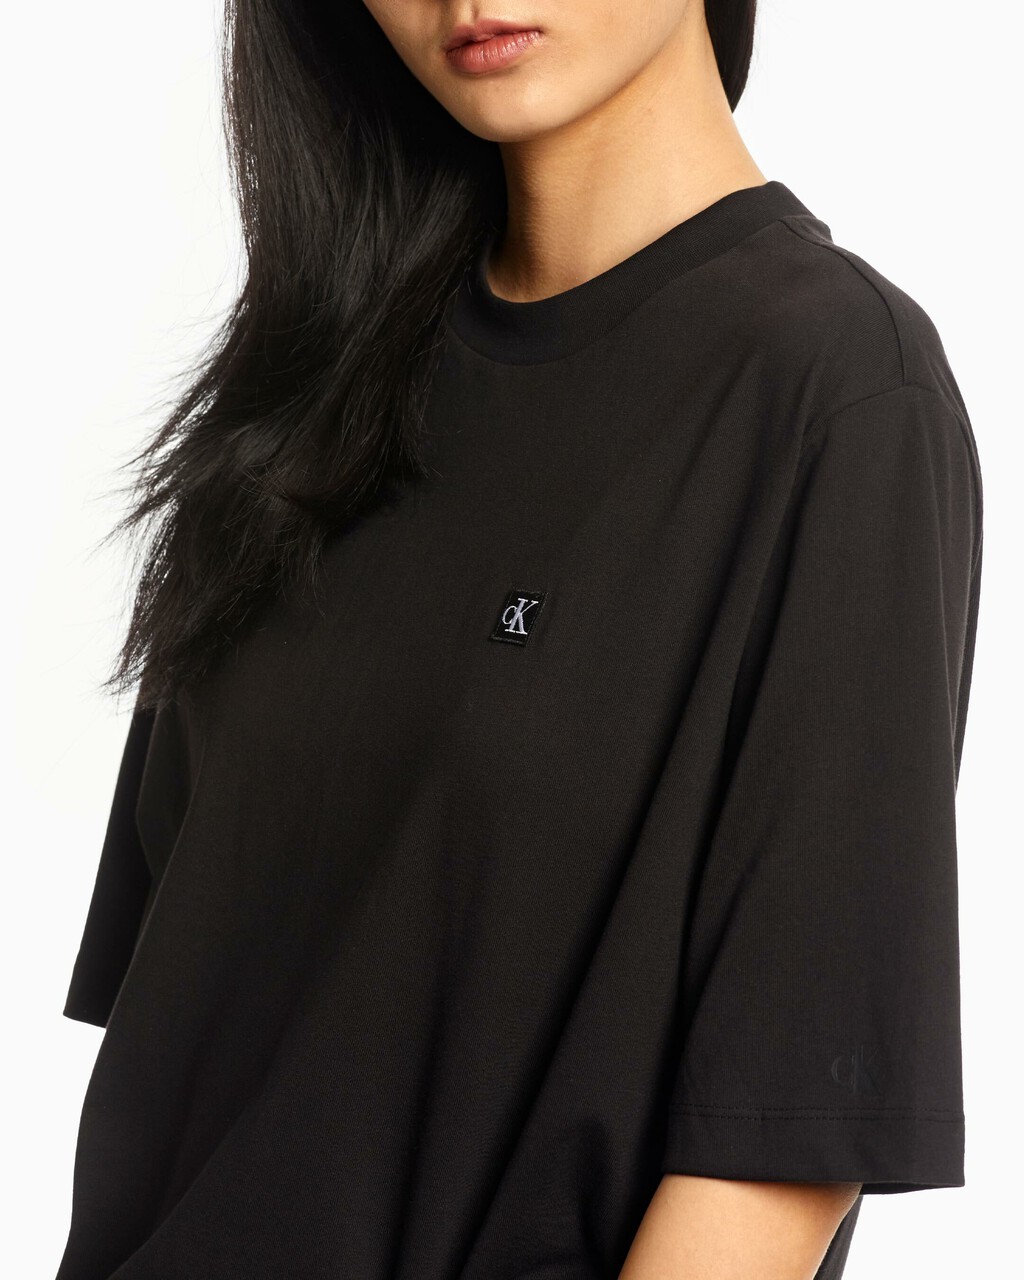 SMALL LOGO RELAXED TEE, Ck Black, hi-res